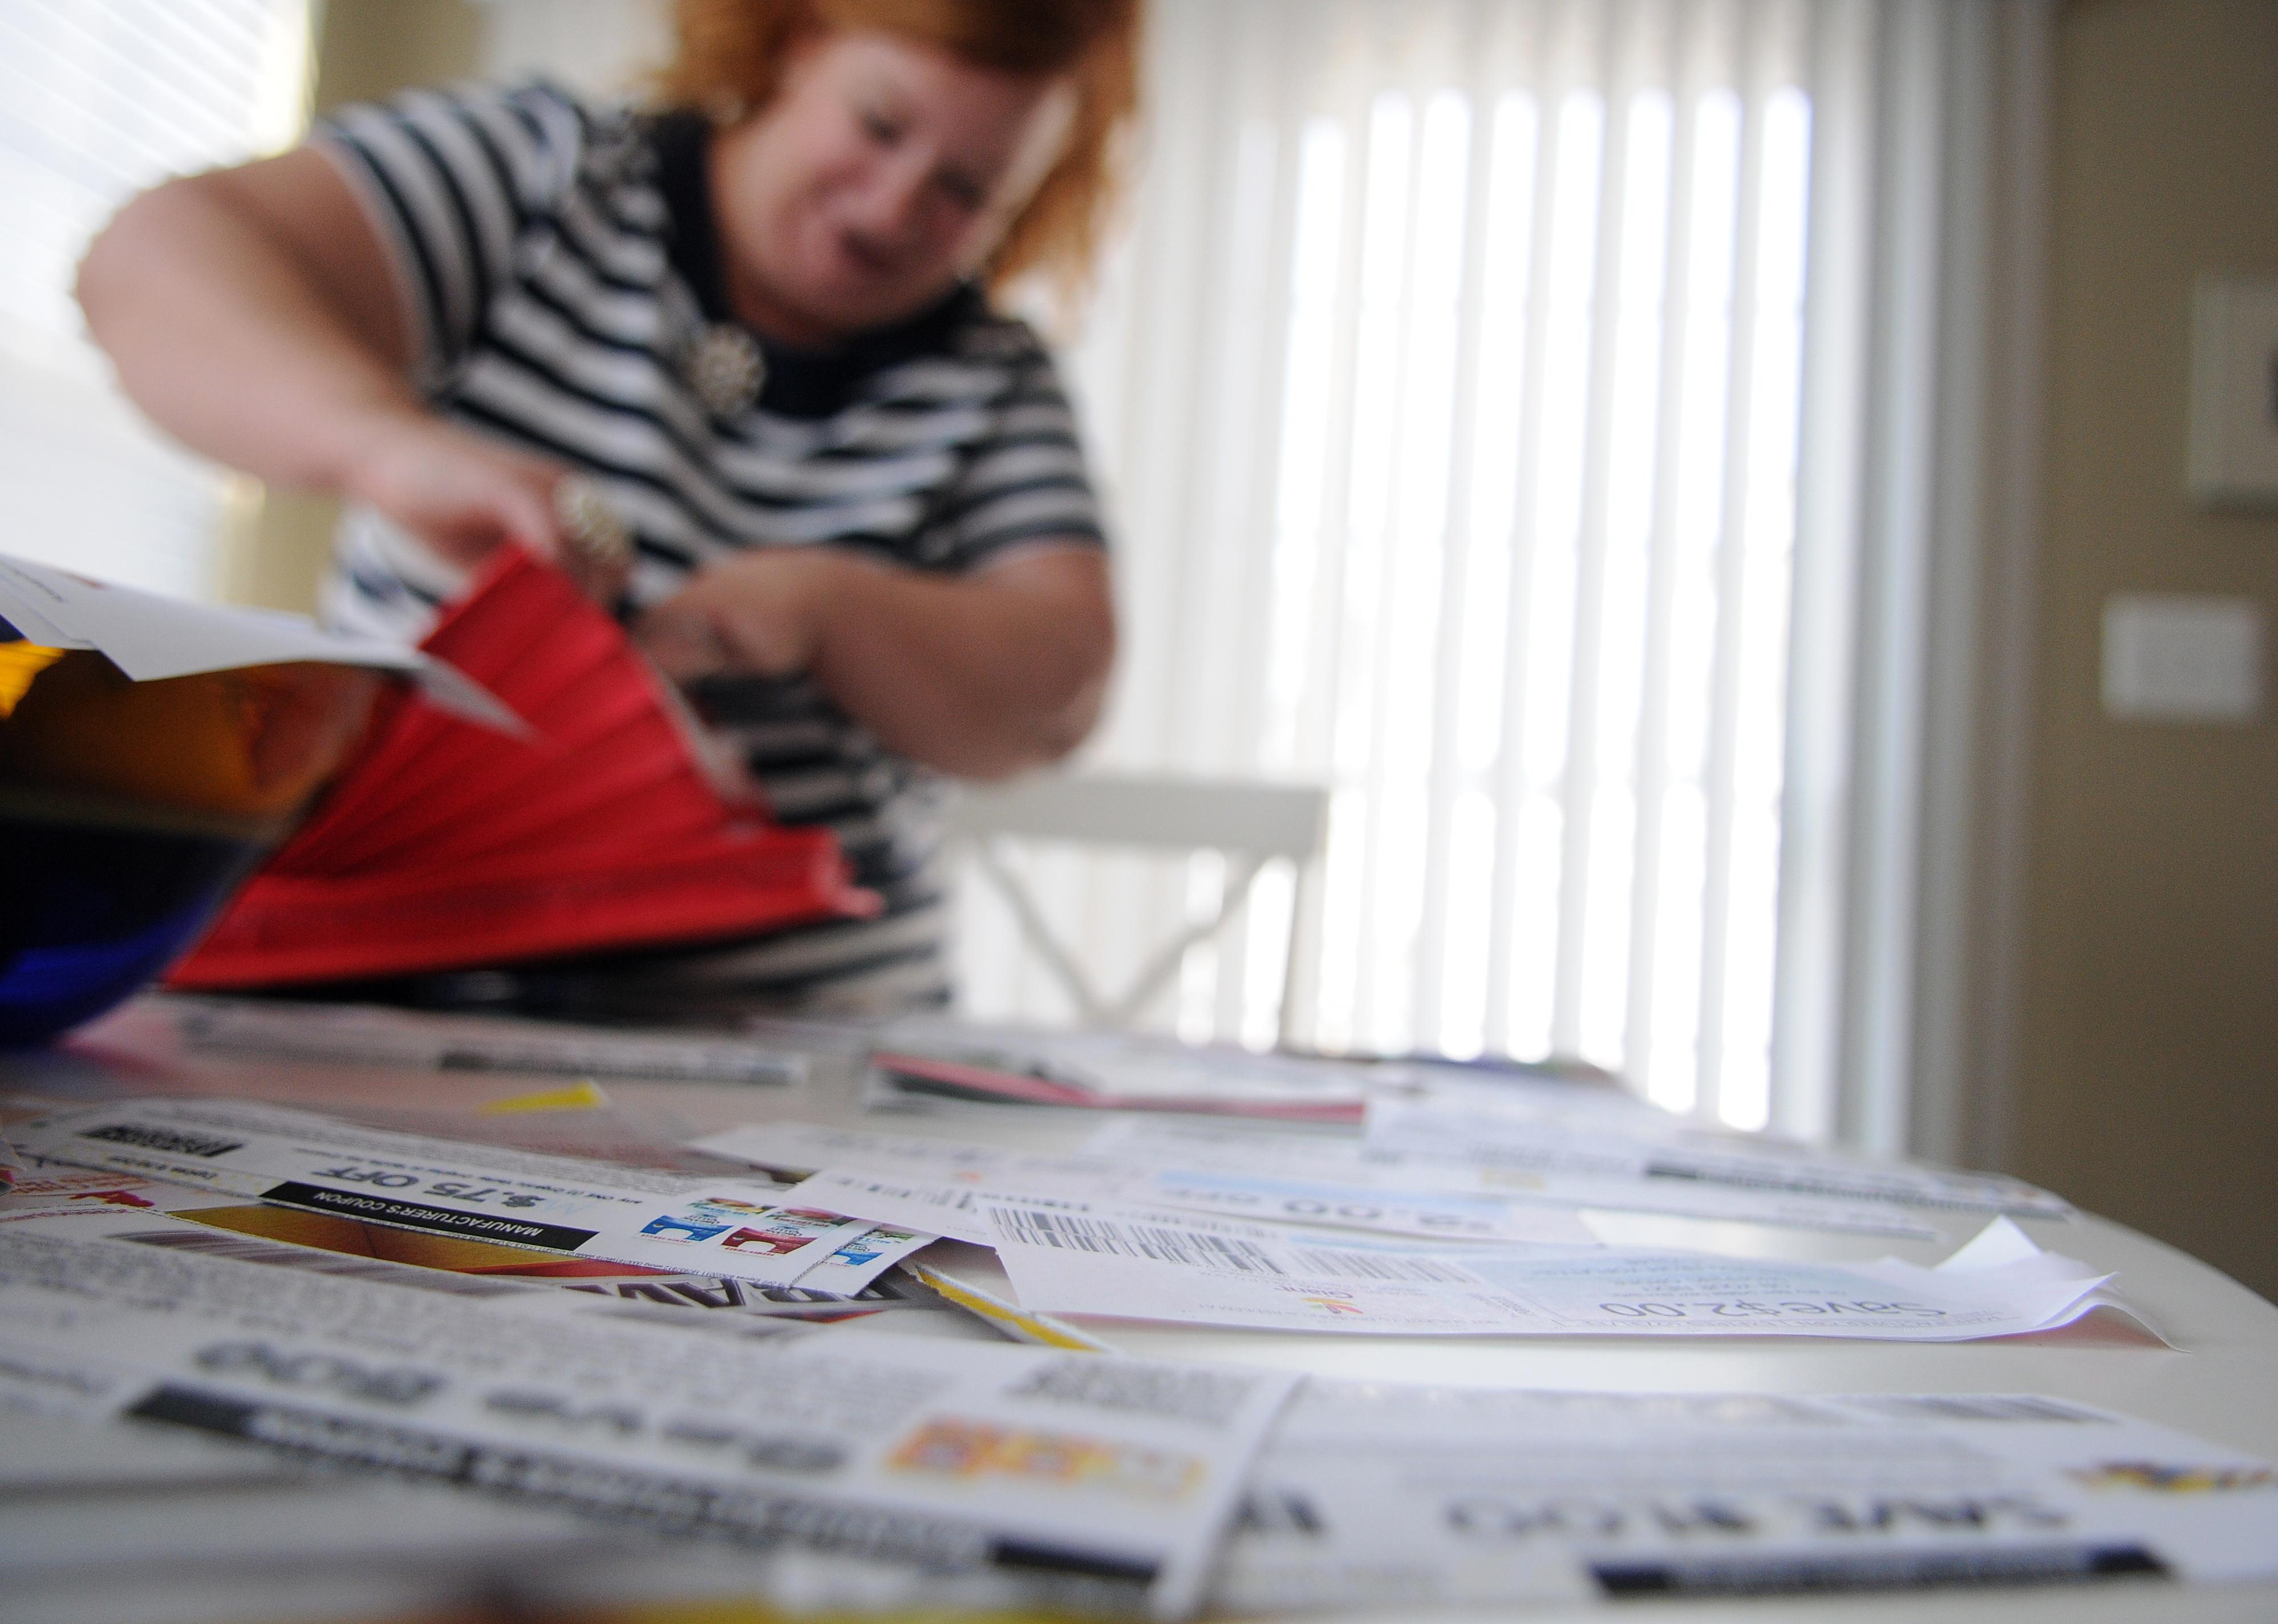 A table full of coupons and a woman blurred out in the background with a folder.